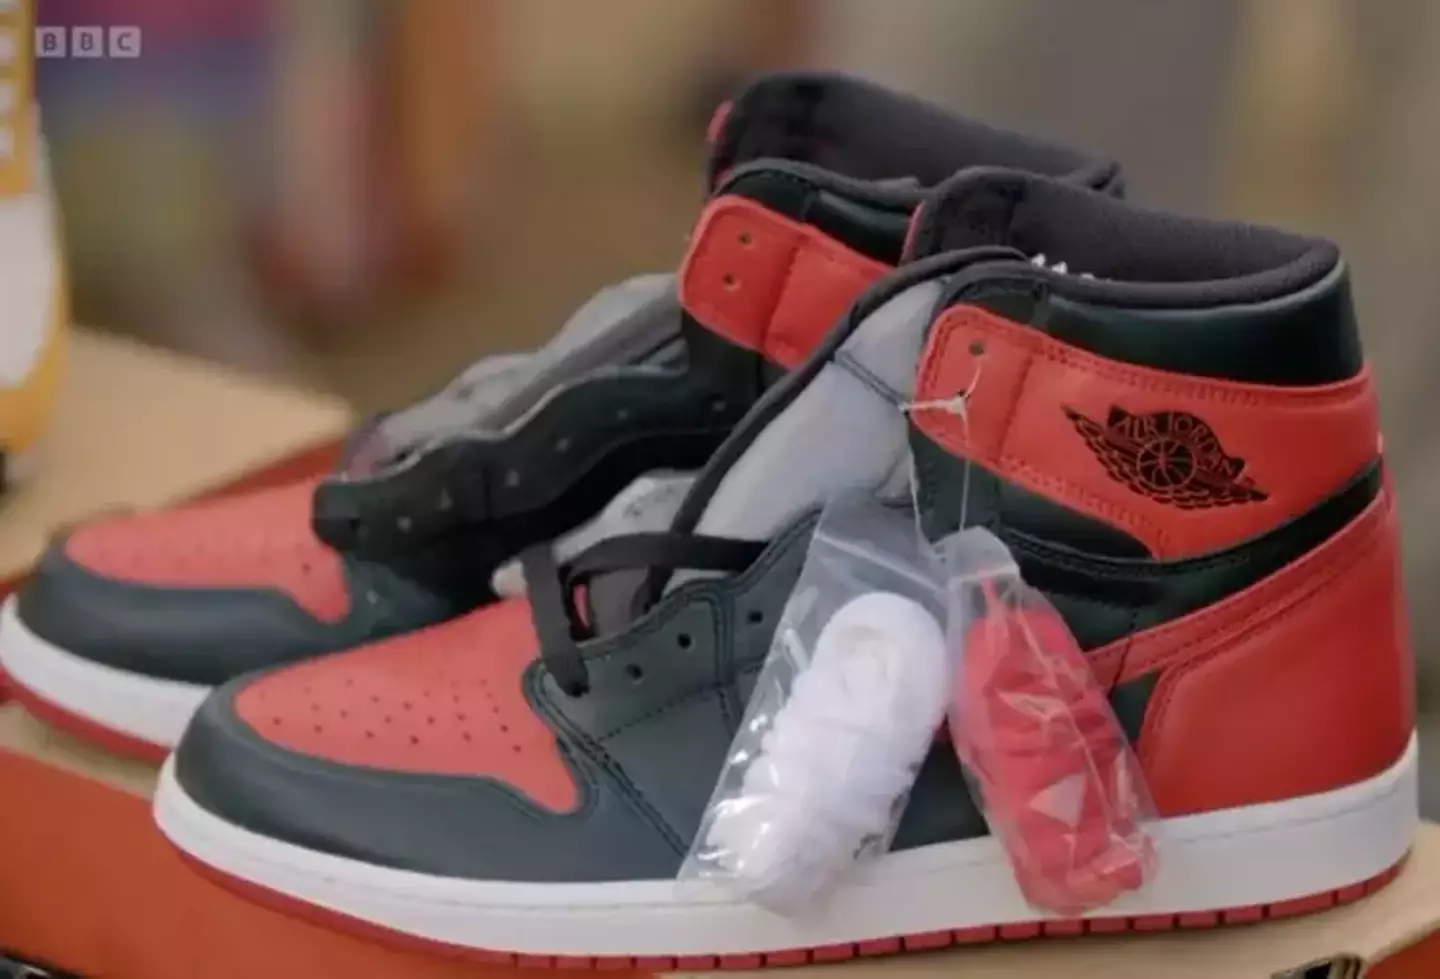 Sneakerheads will know all about the Jordan 1. (BBC)